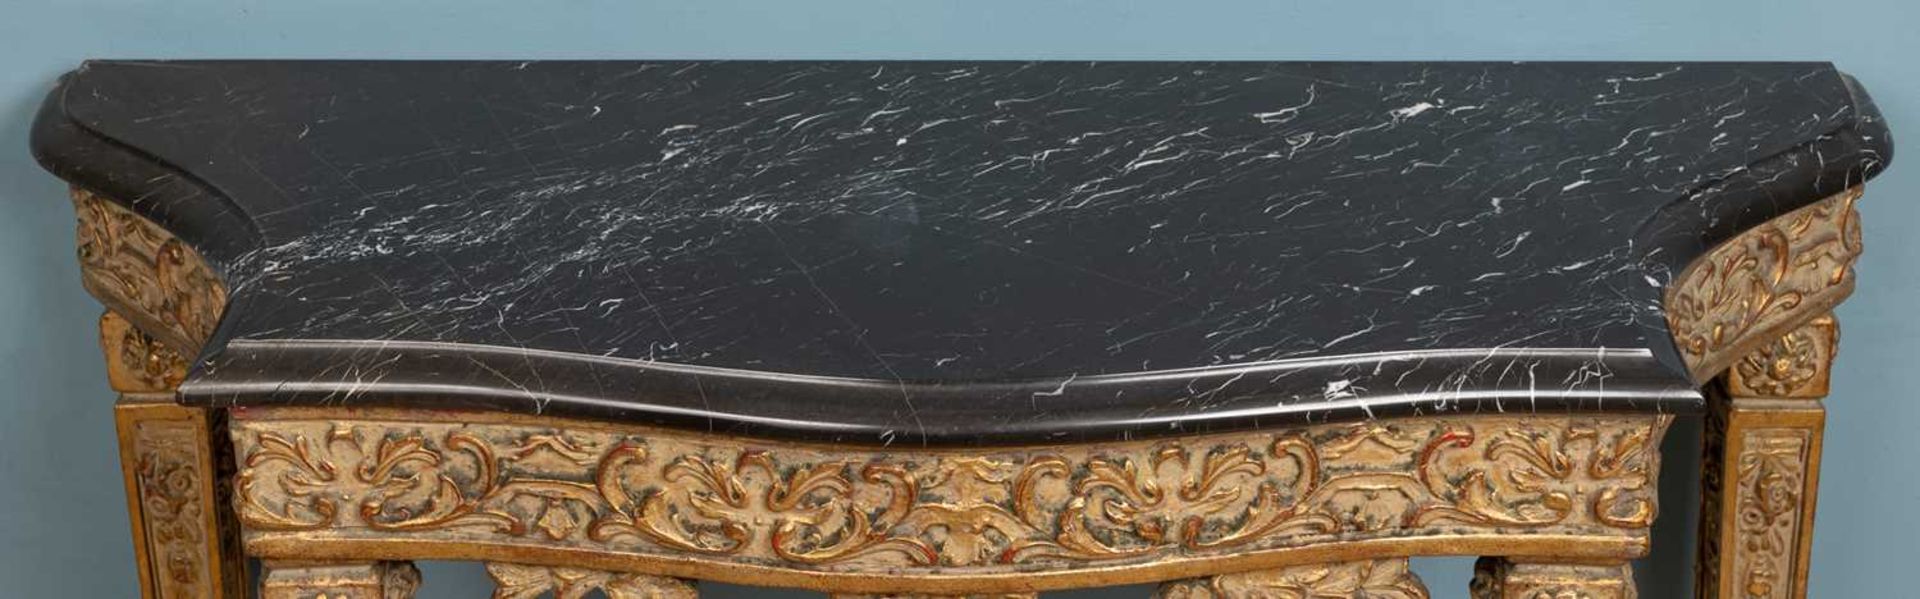 An 18th century French style ornately carved and painted giltwood console table - Image 2 of 7